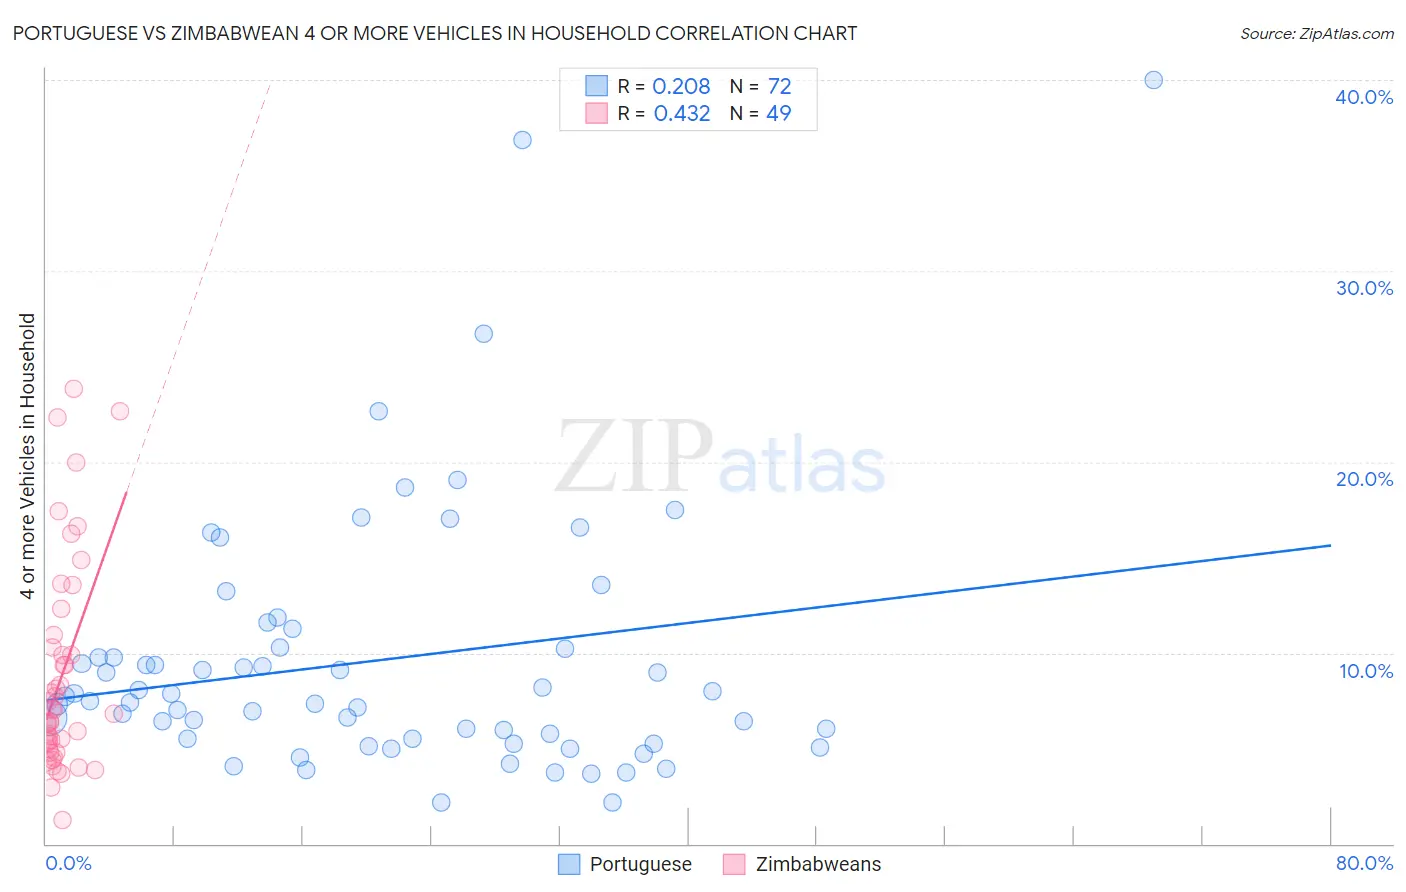 Portuguese vs Zimbabwean 4 or more Vehicles in Household